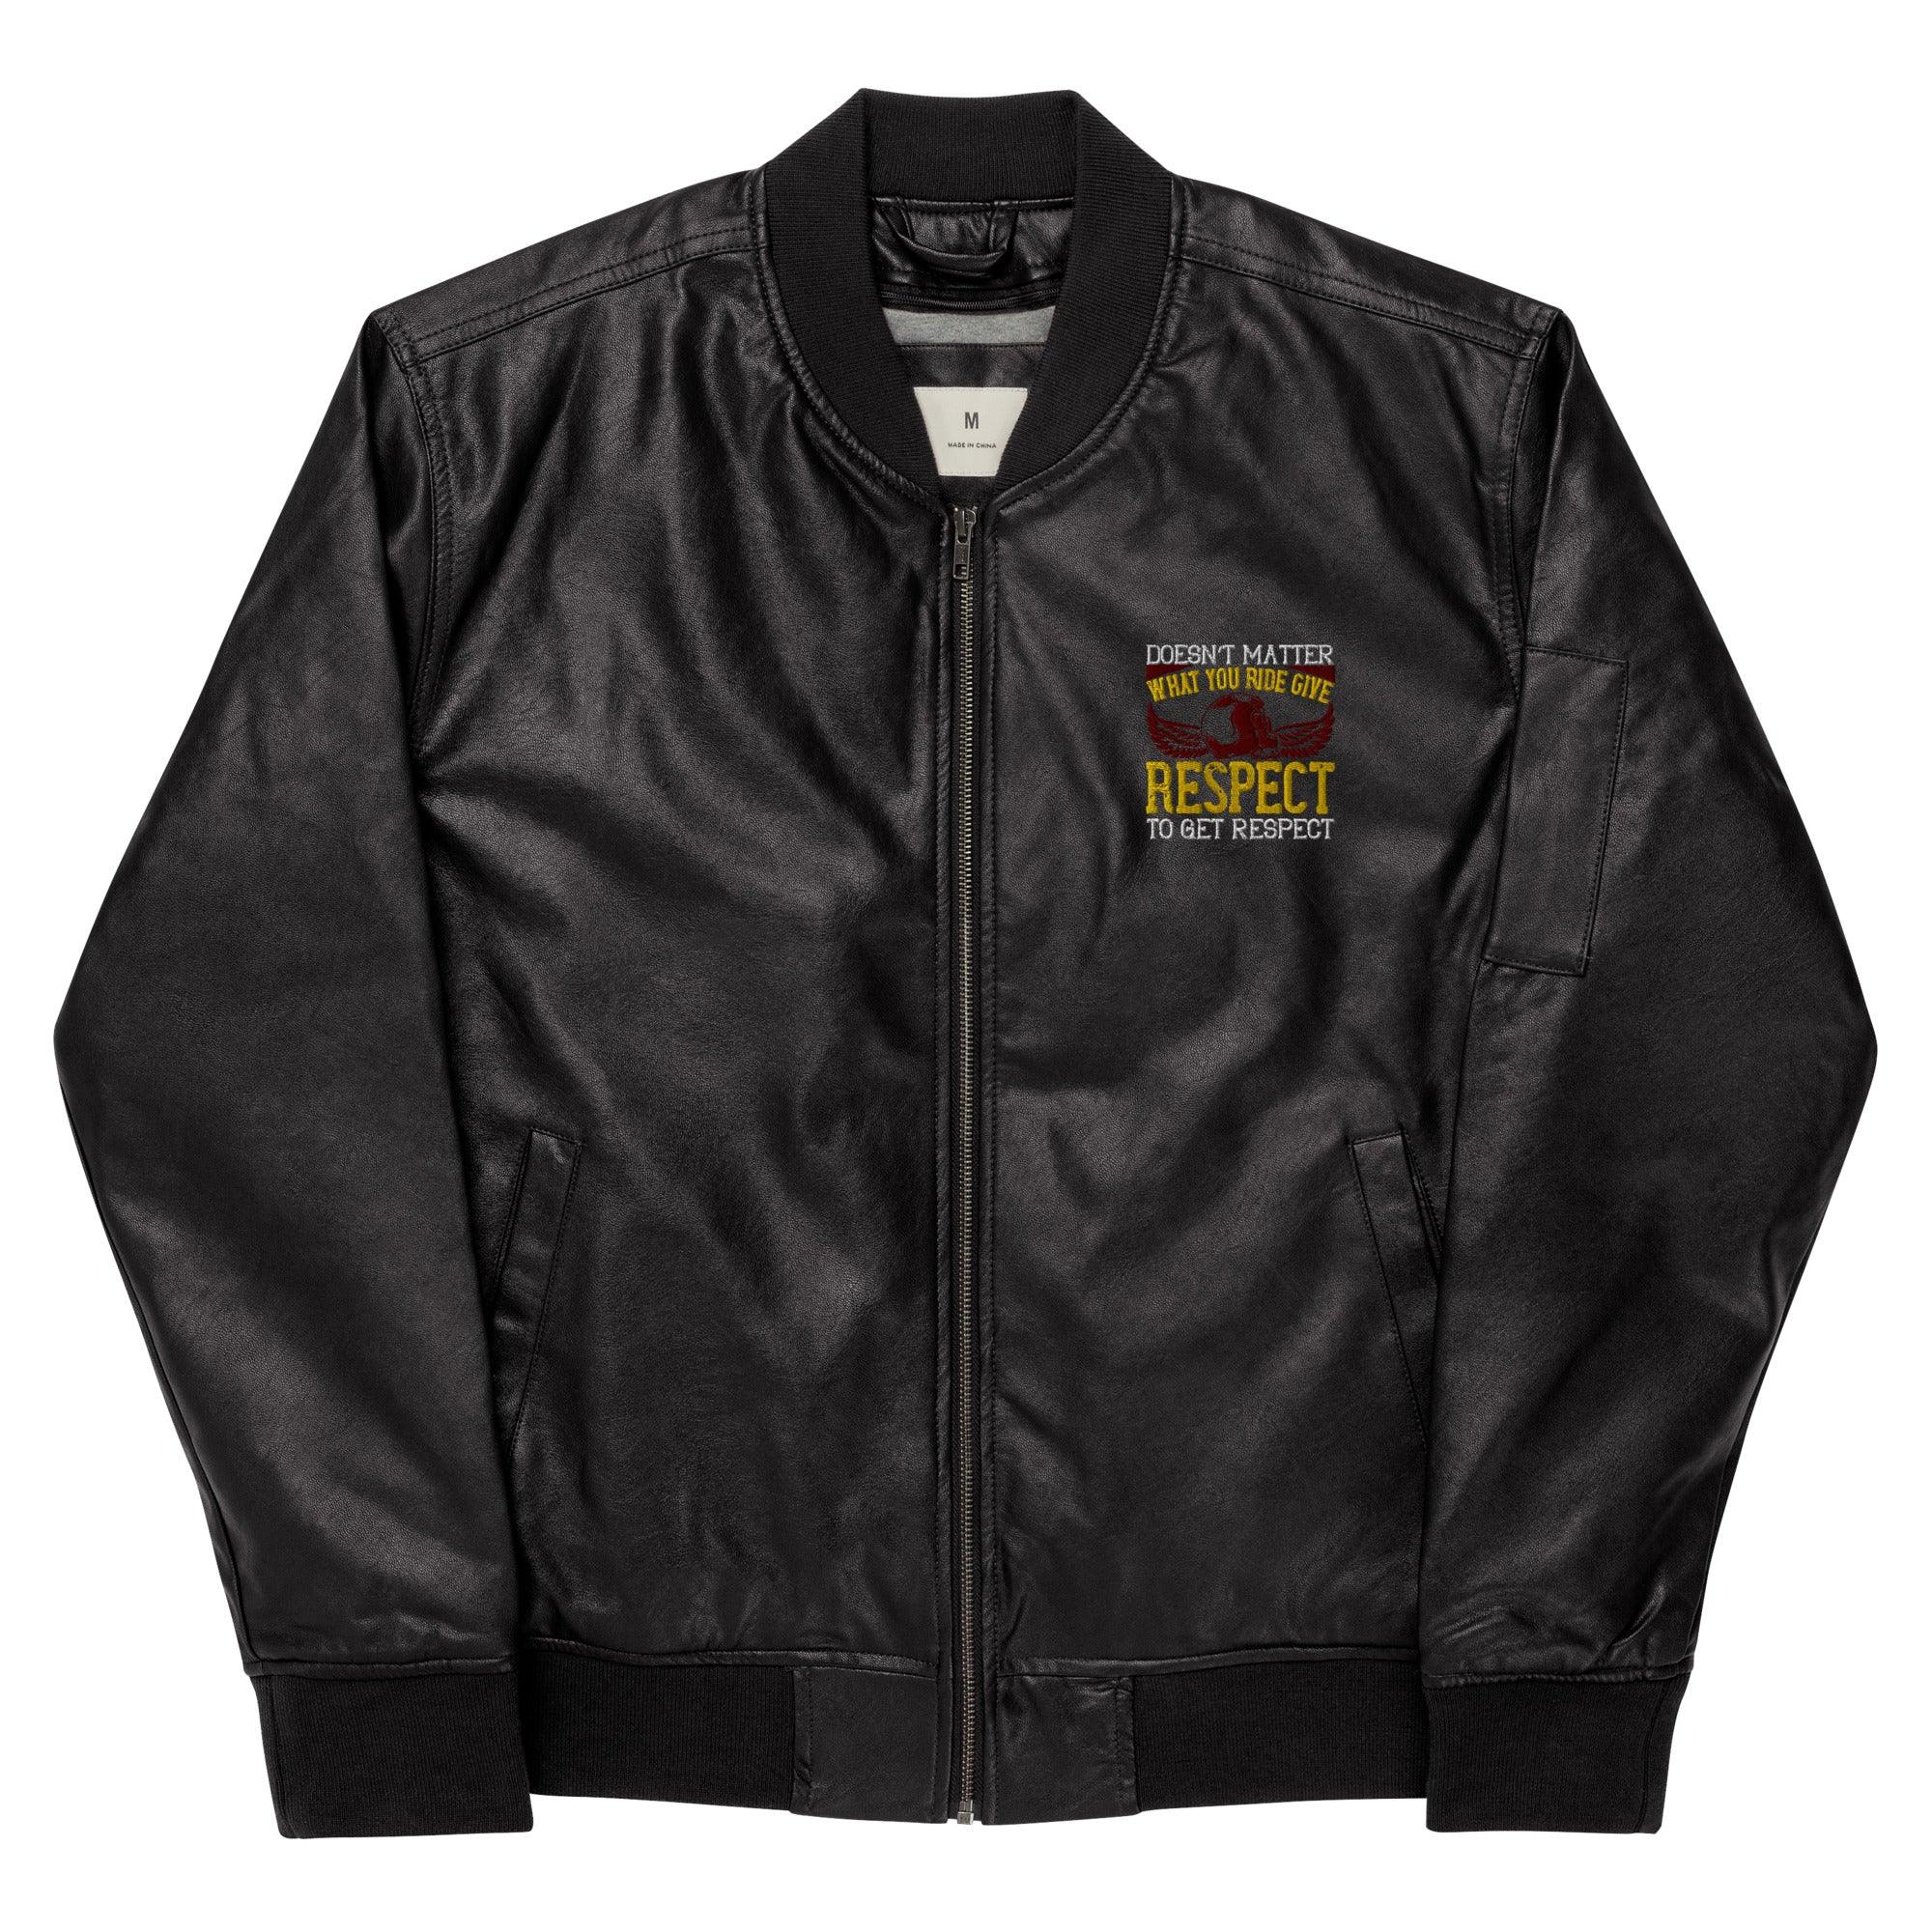 Leather Bomber Jacket Doesnt Matter Respect - Canvazon